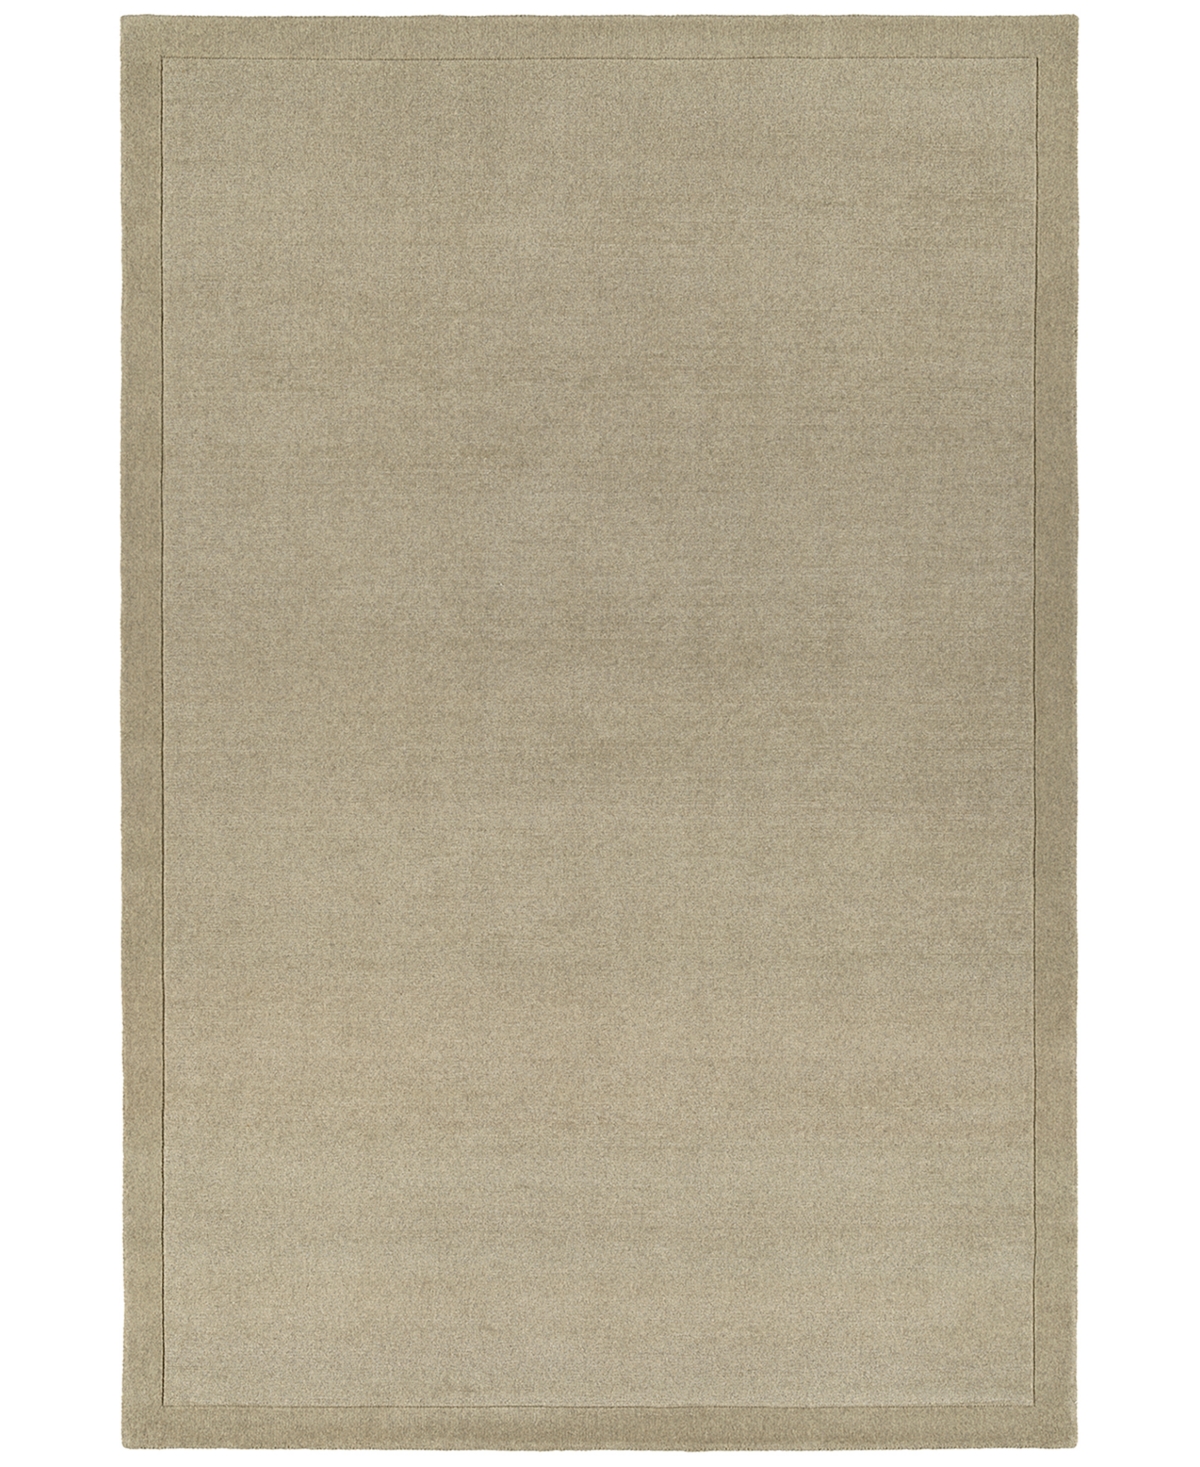 Stanton Rug Company Heaven Hv100 8' X 10' Area Rug In Ivory